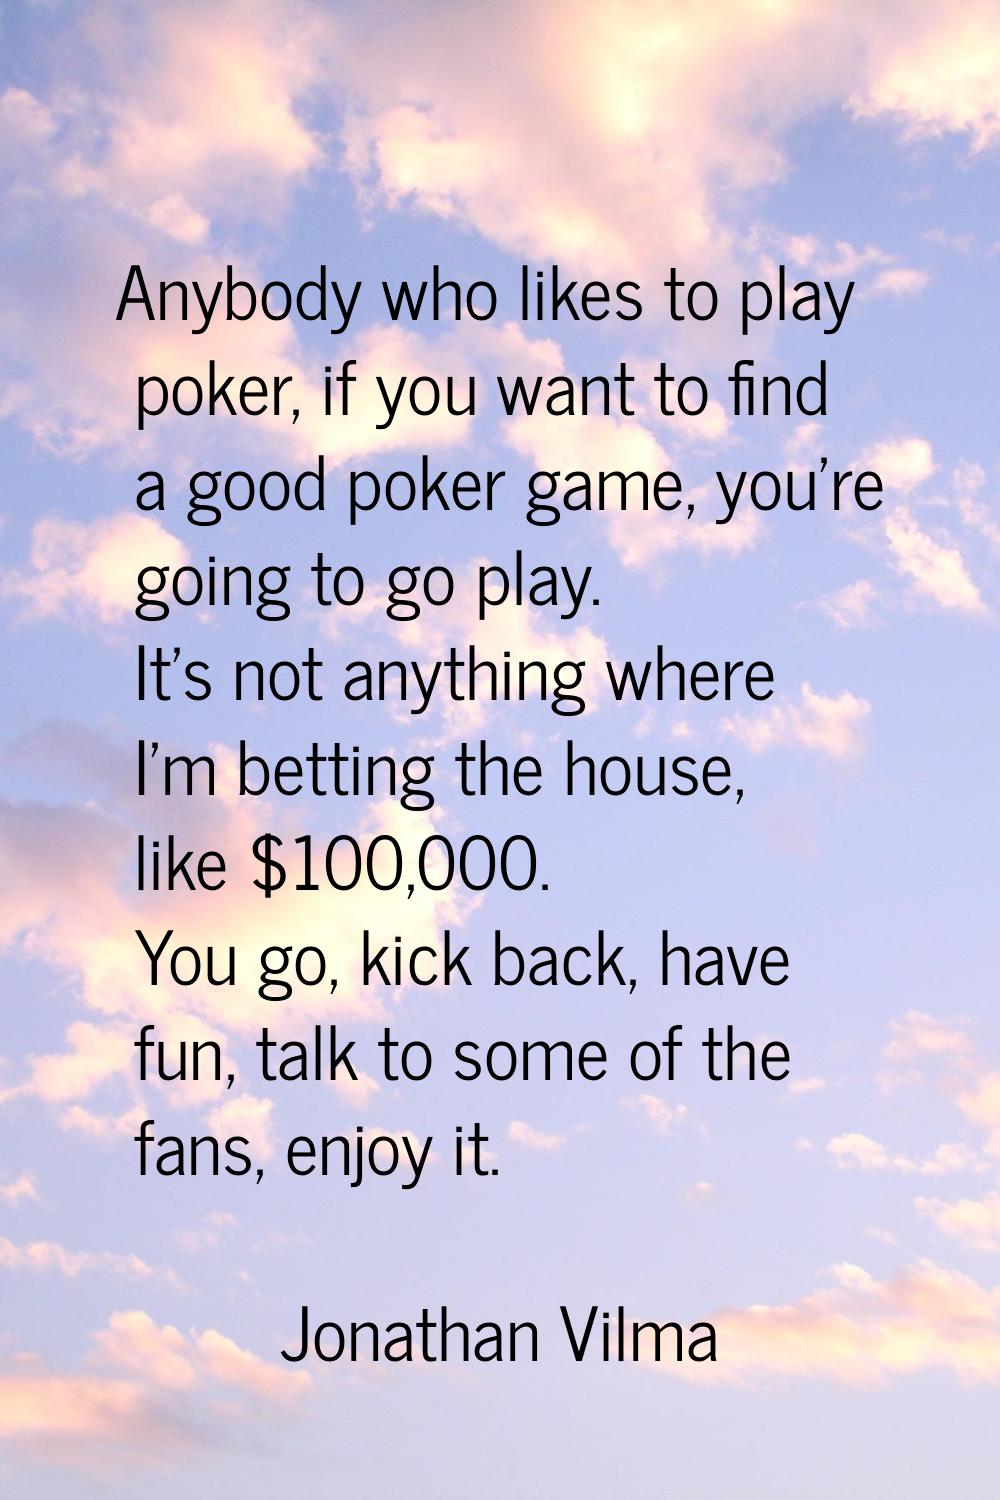 Anybody who likes to play poker, if you want to find a good poker game, you're going to go play. It